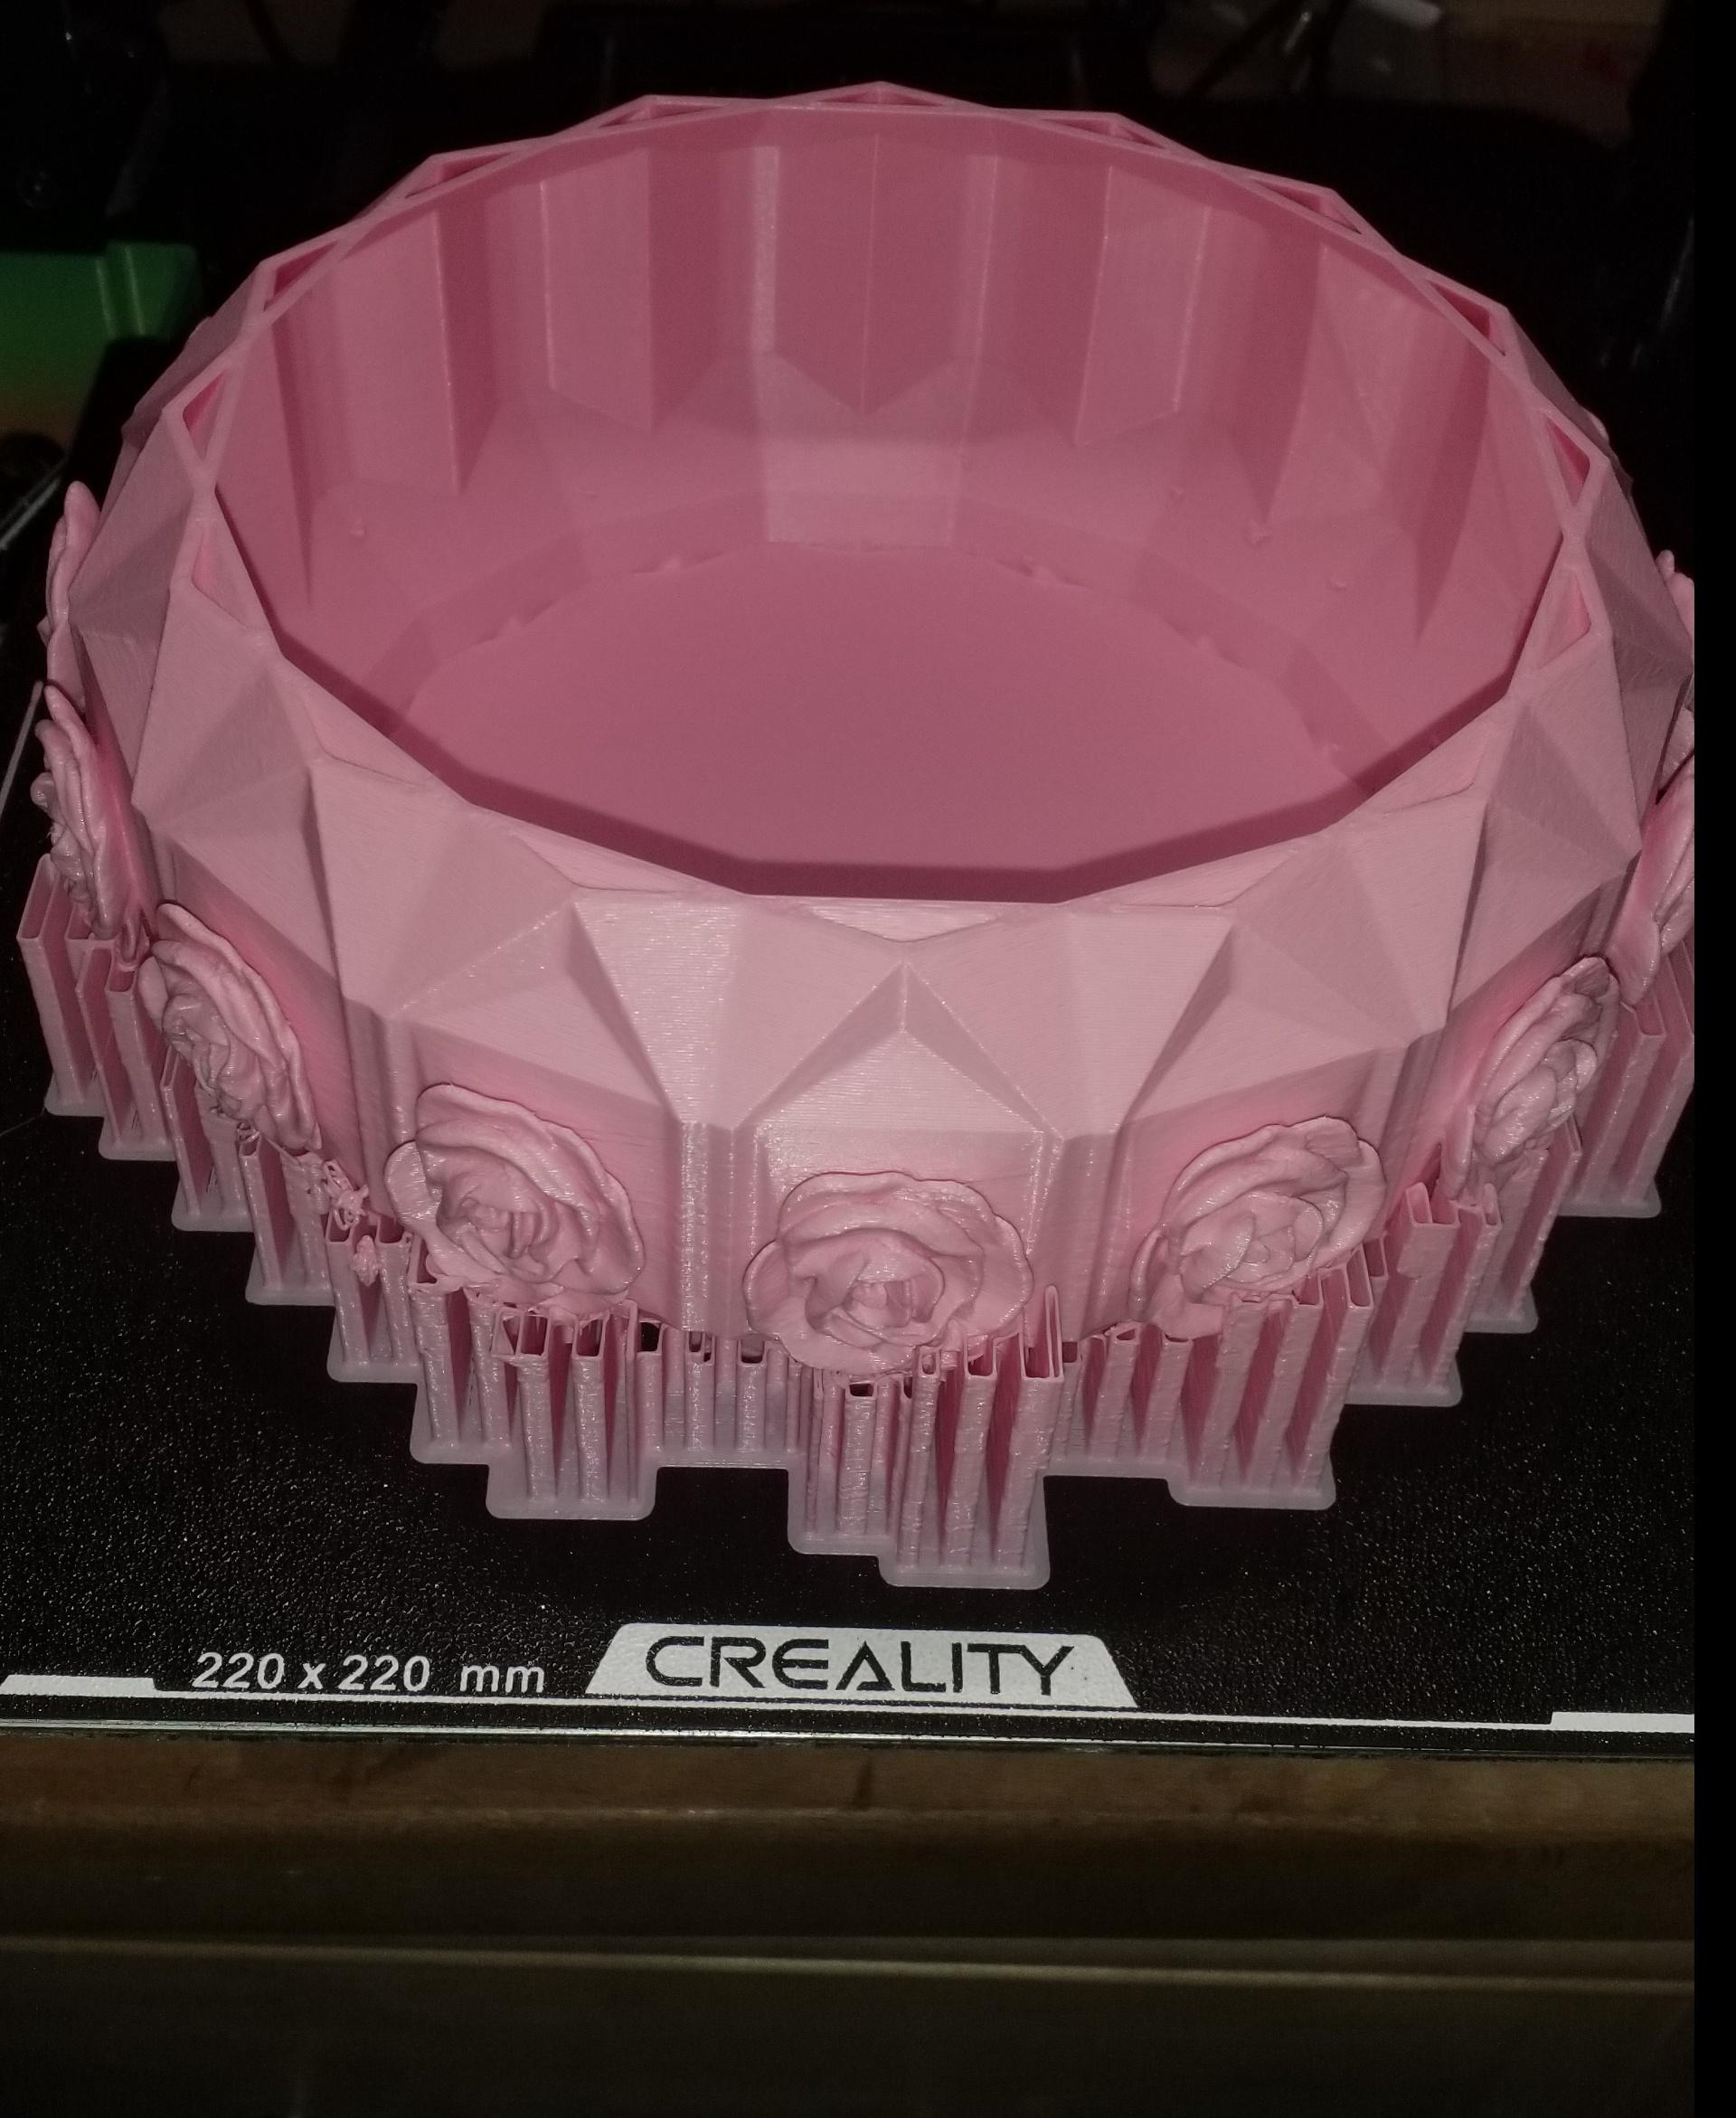 Geometric Rose Bowl - Printed on ender 3 KE and used auto supports to hotbed, this was a mistake as the bottoms of a few of the roses did not have sufficient support (All are passable, one is missing the bottom 3/16in) - 3d model